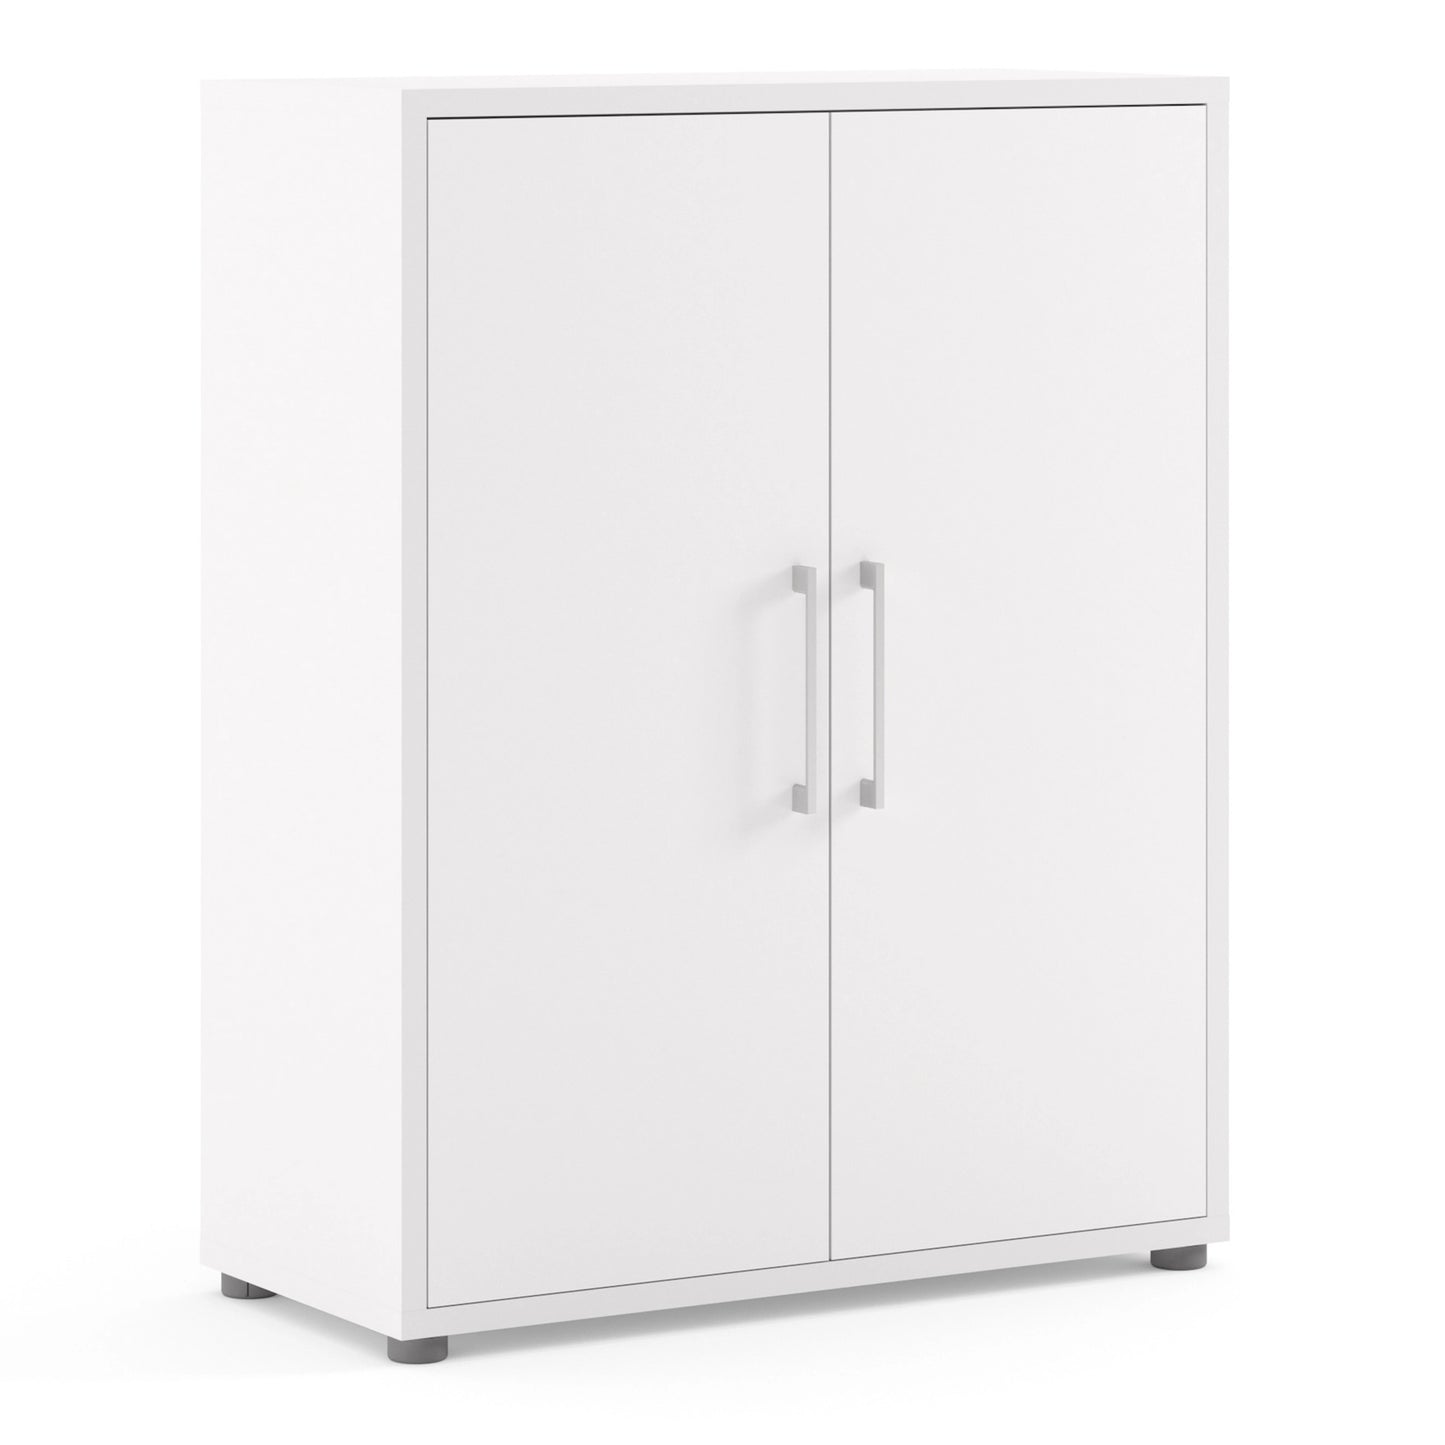 Furniture To Go Prima Bookcase 2 Shelves with 2 Doors in White